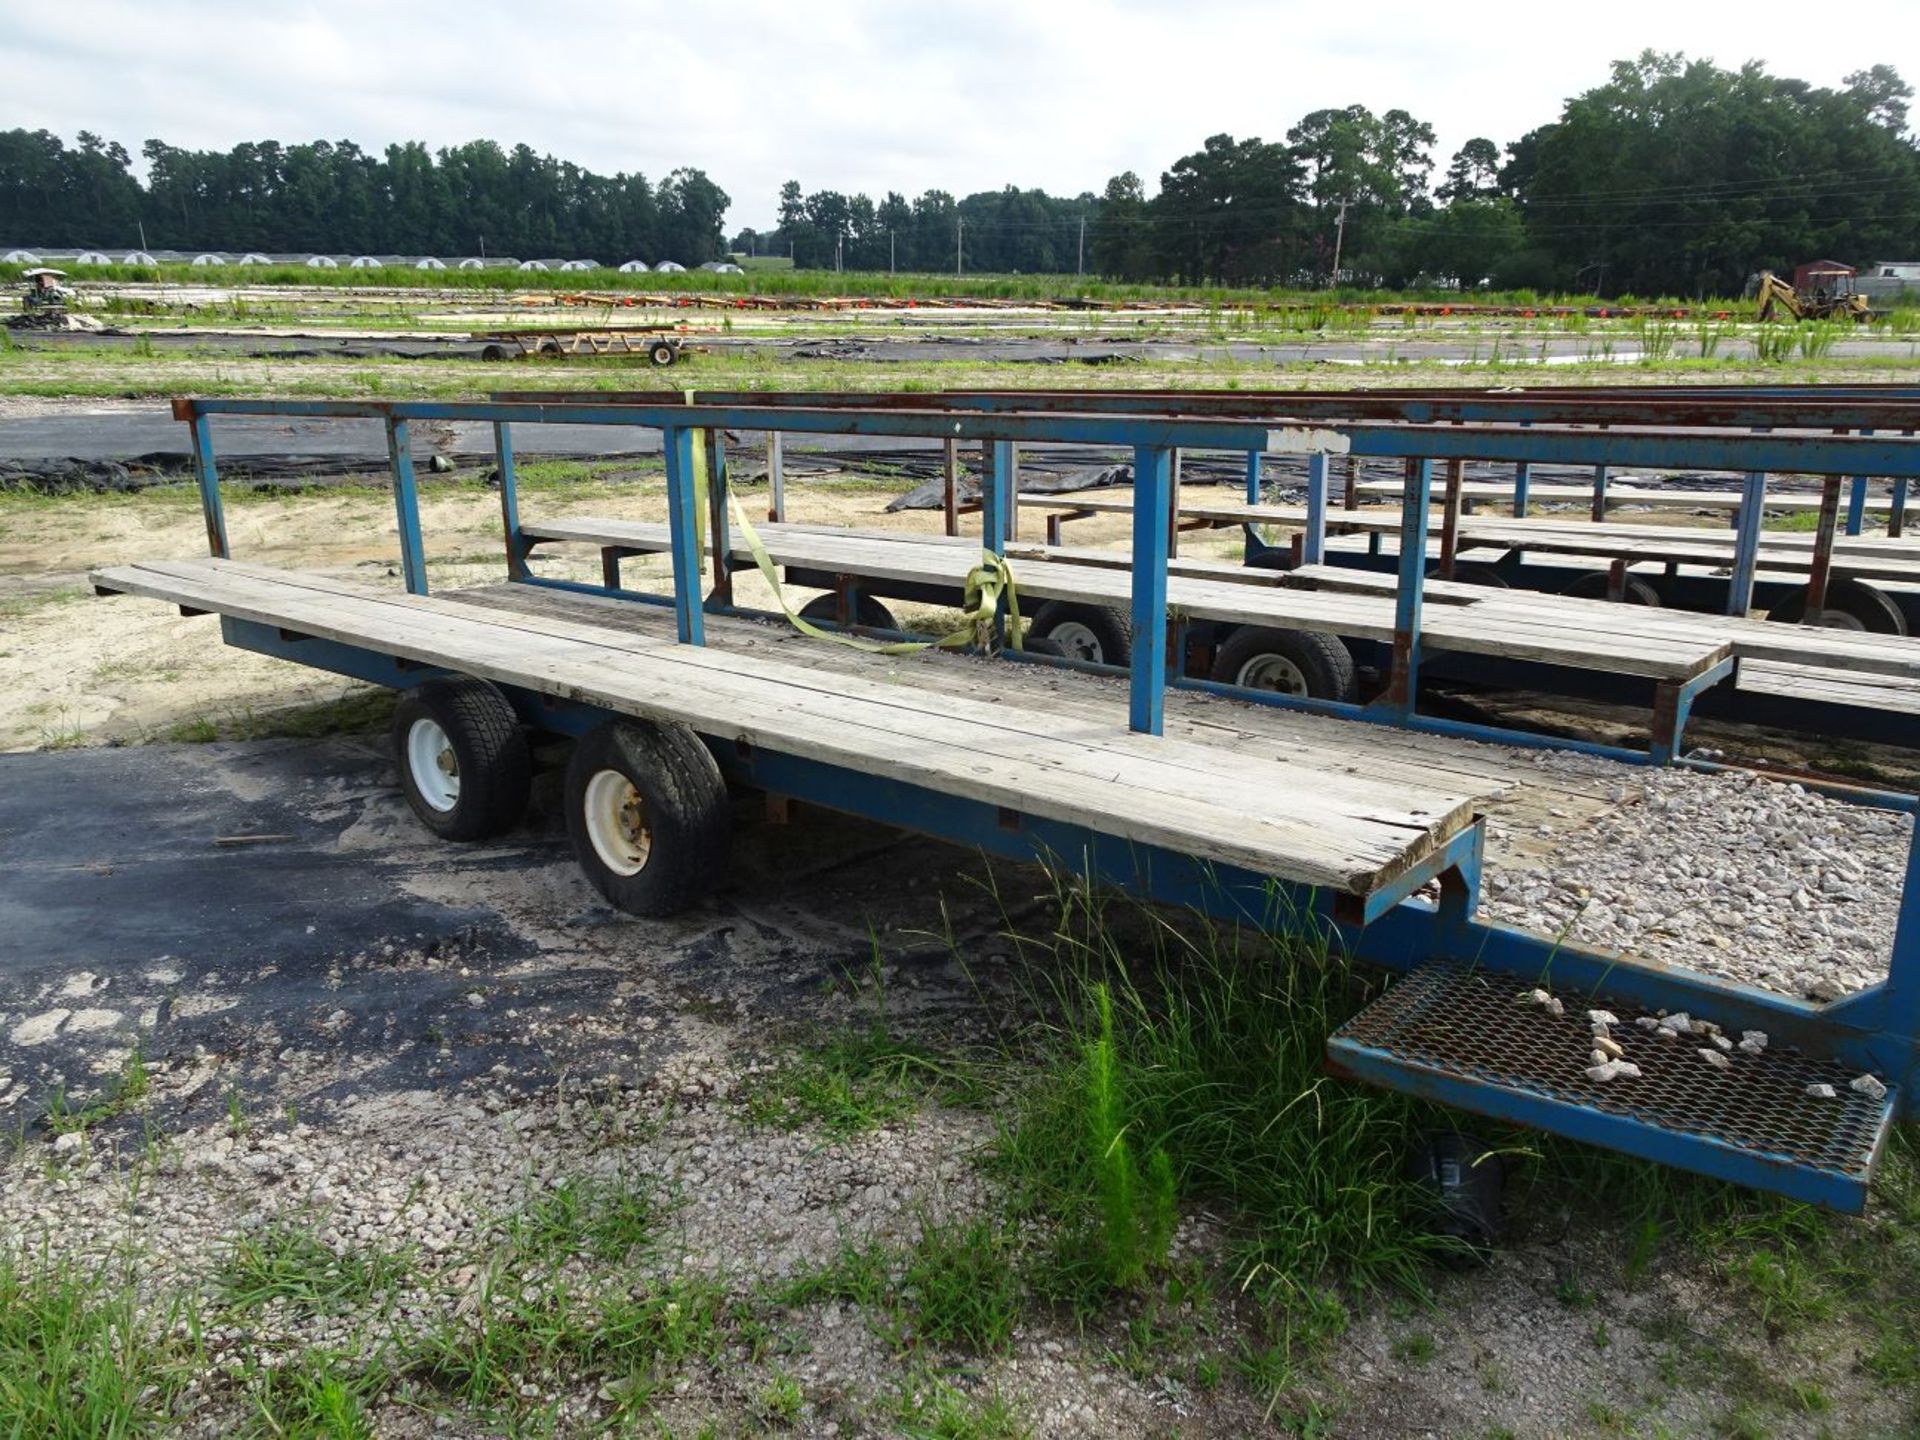 FARM BUILT CUSTOM CART TRAILER, WOOD BED, HAS OUTSIDE MOUNTED WOOD BENCHES, 17' LONG, TANDEM AXLE, - Image 4 of 4